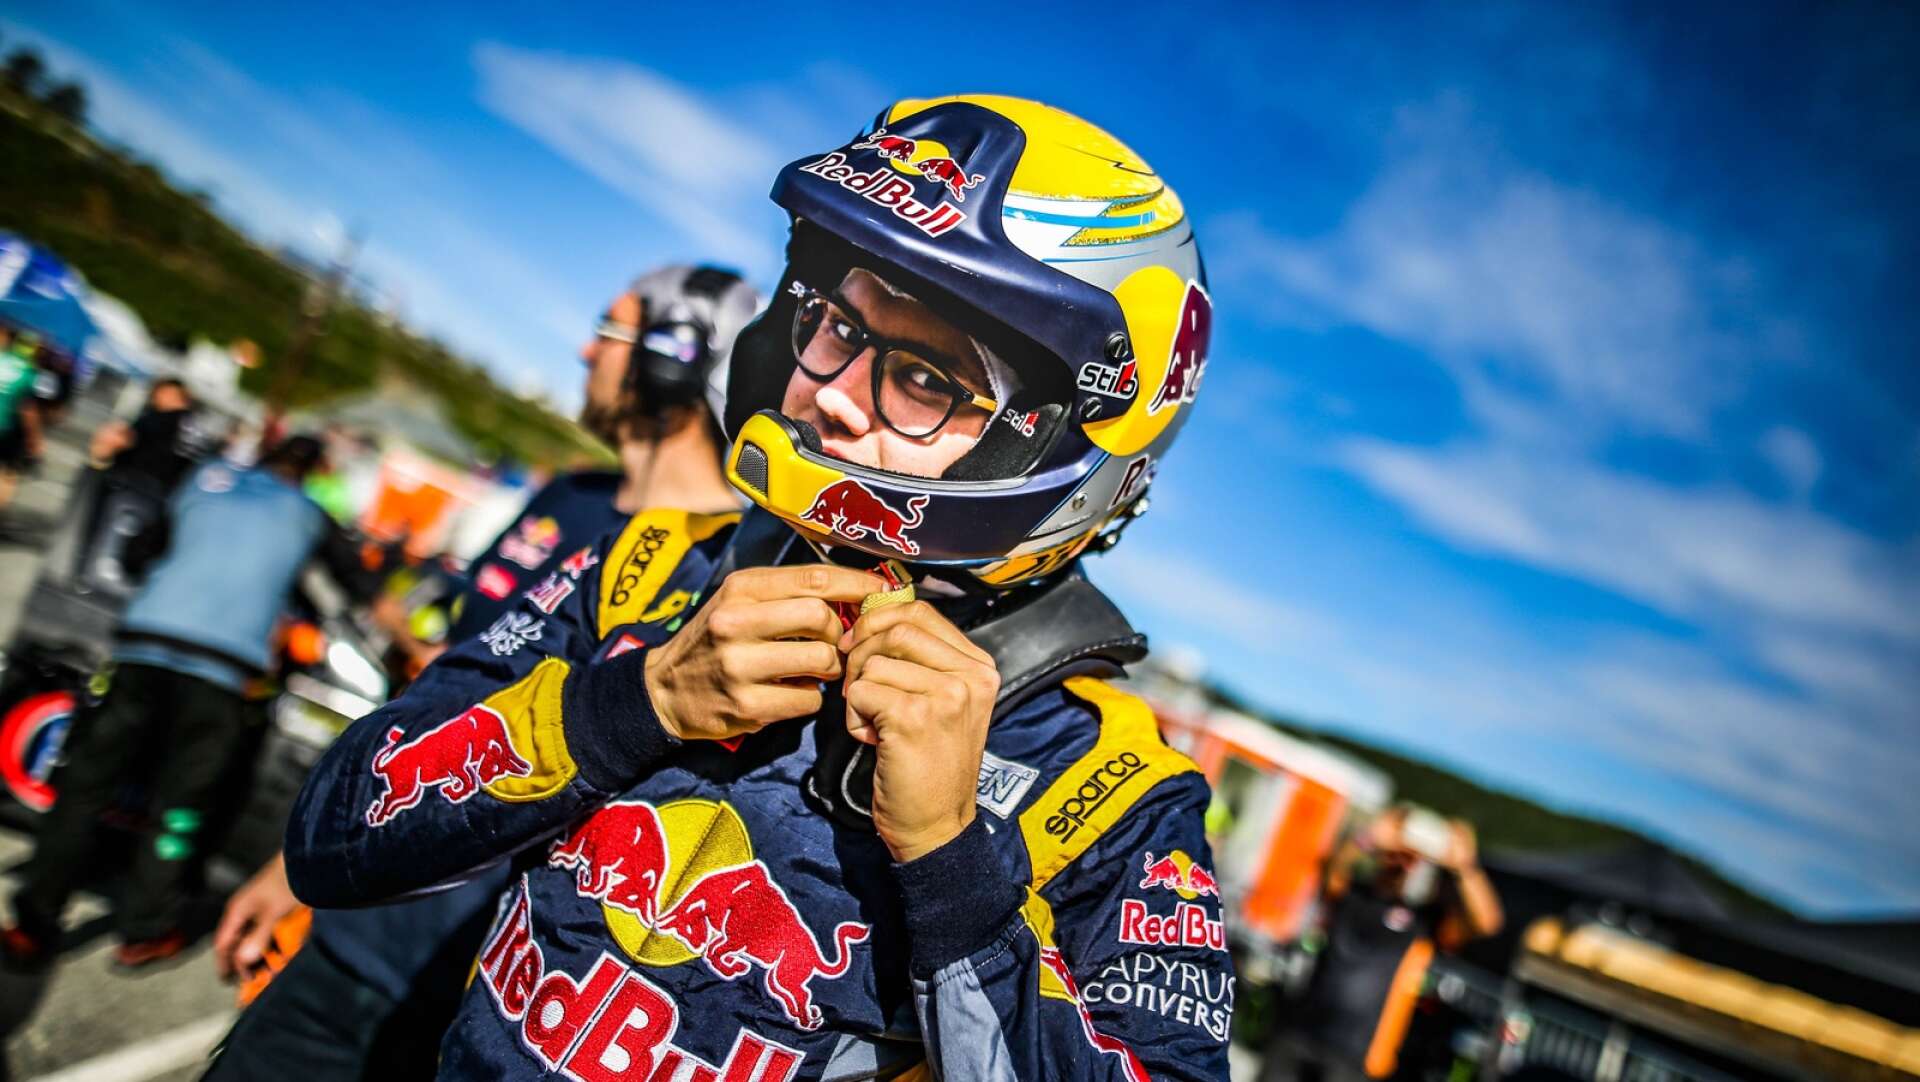 Foto: @World / Red Bull Content Pool